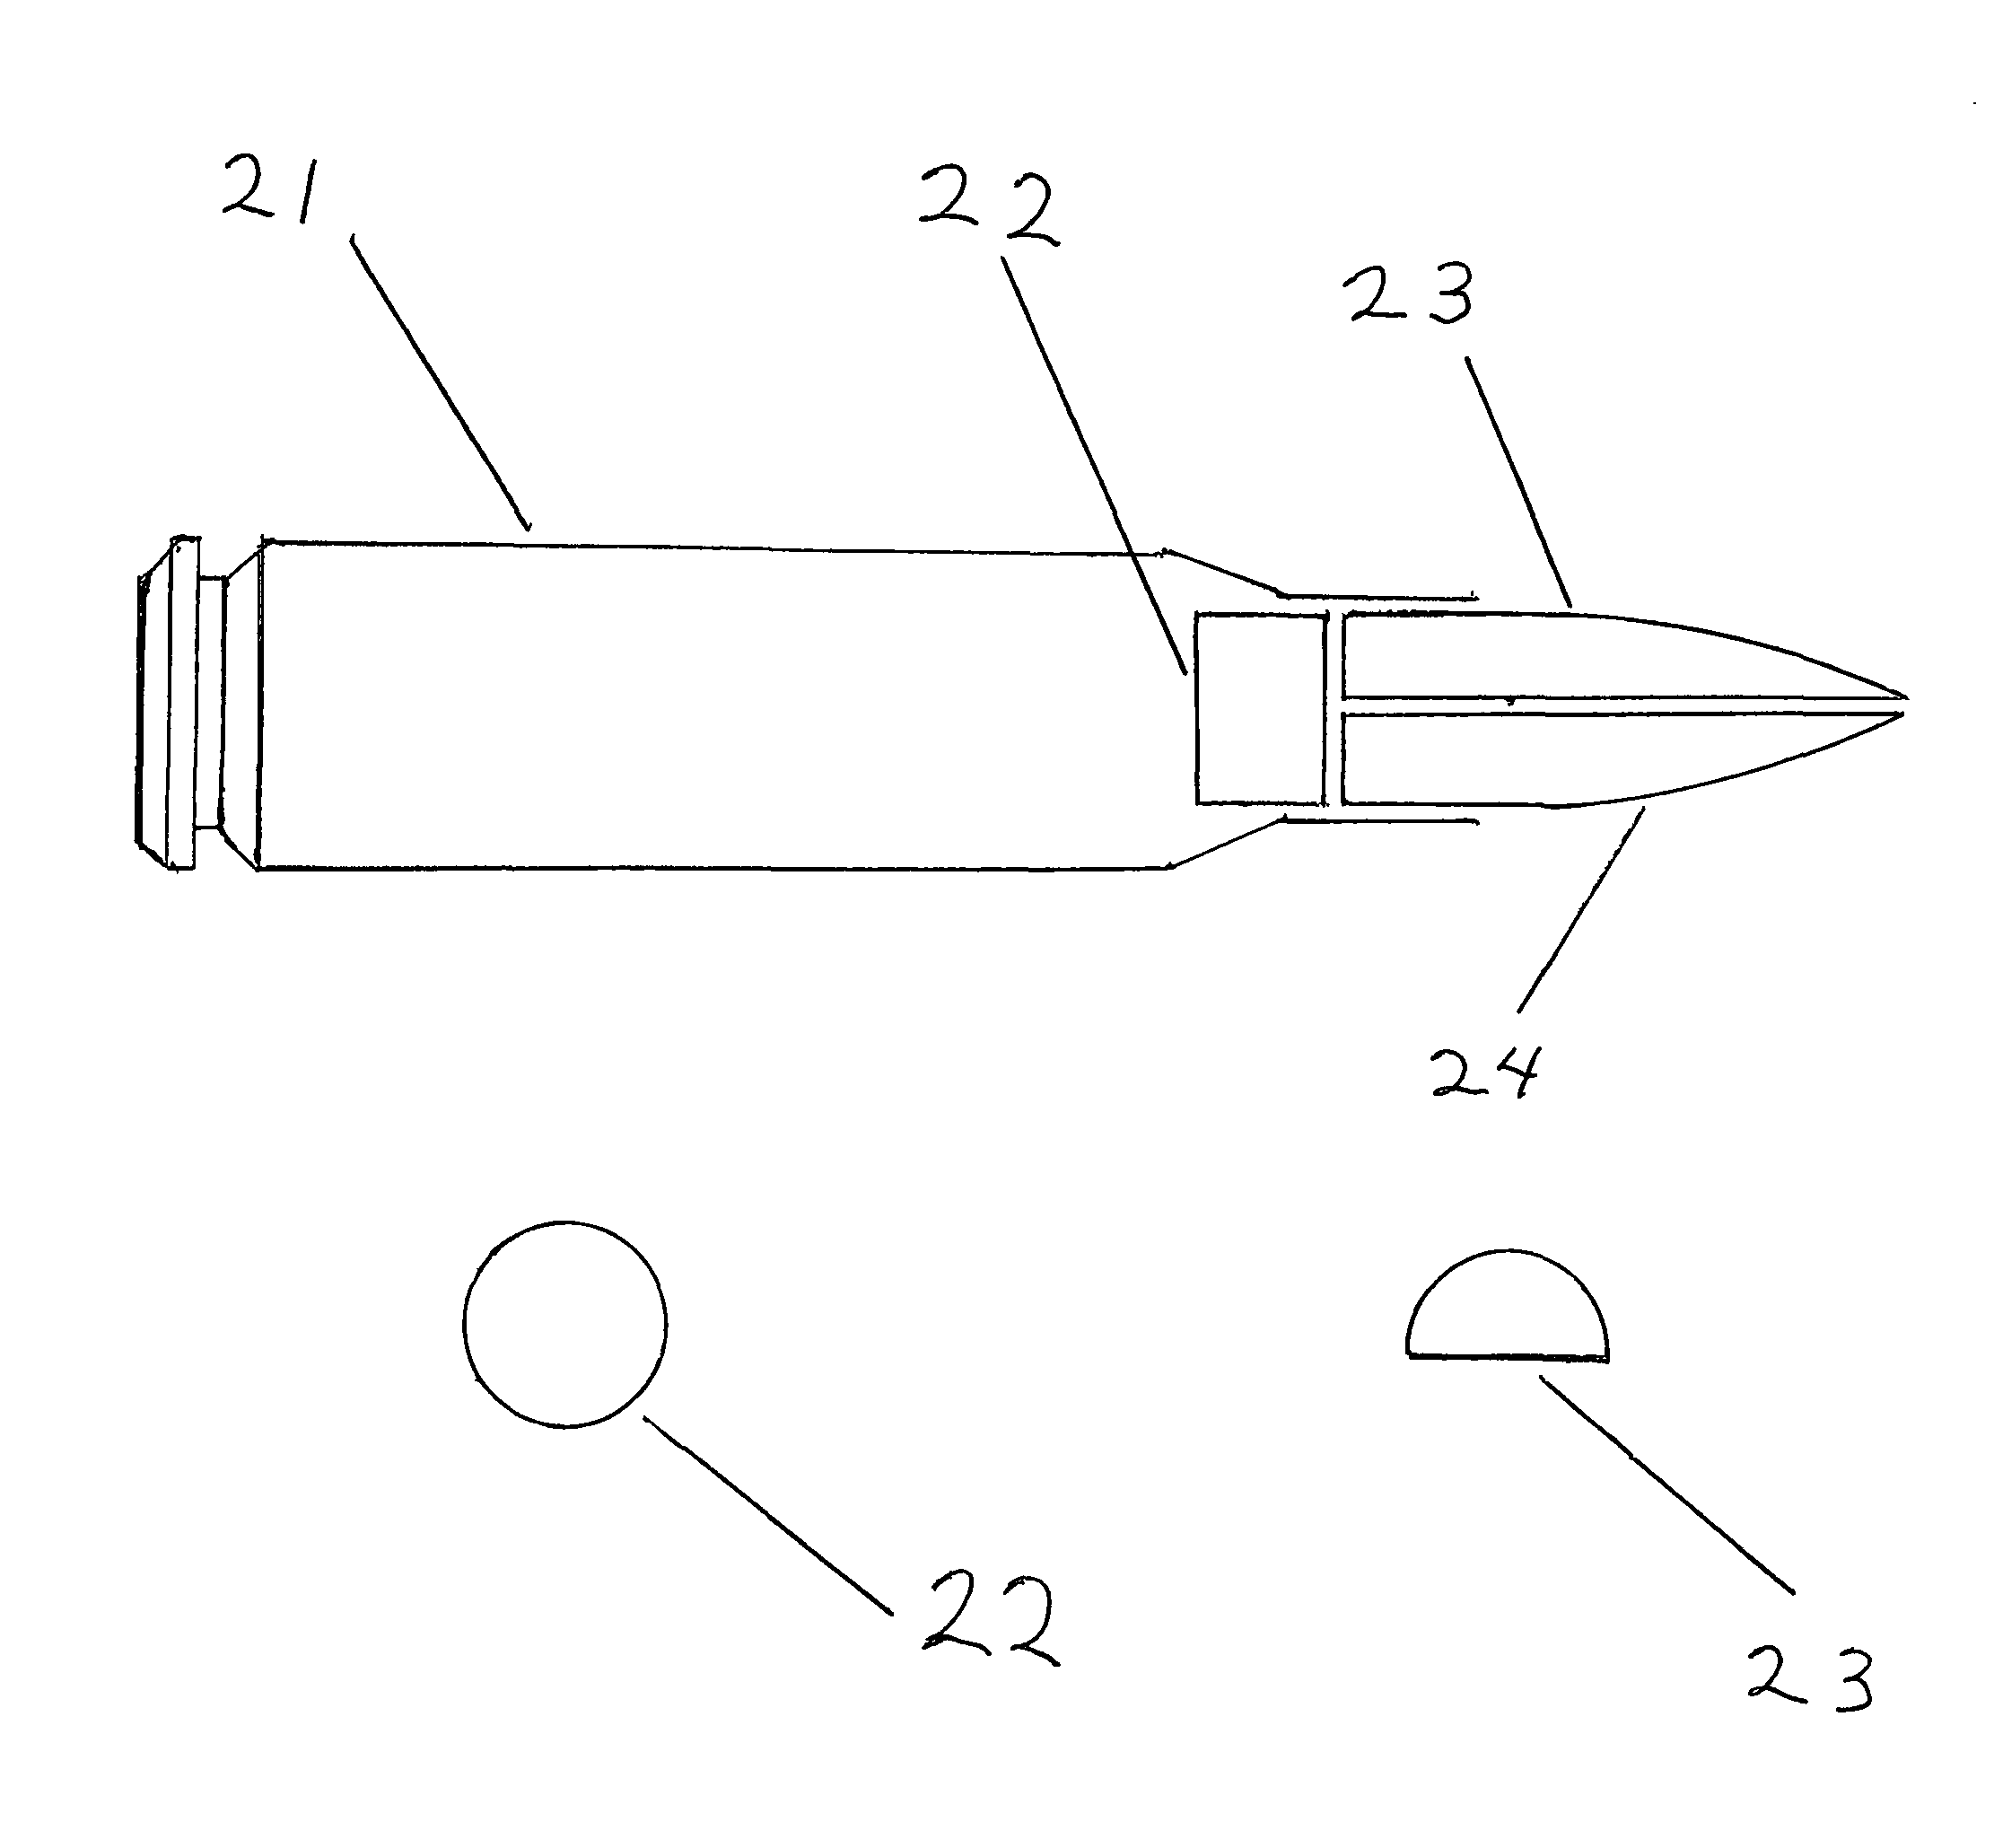 Gun firing method for the simultaneous dispersion of projectiles in a pattern